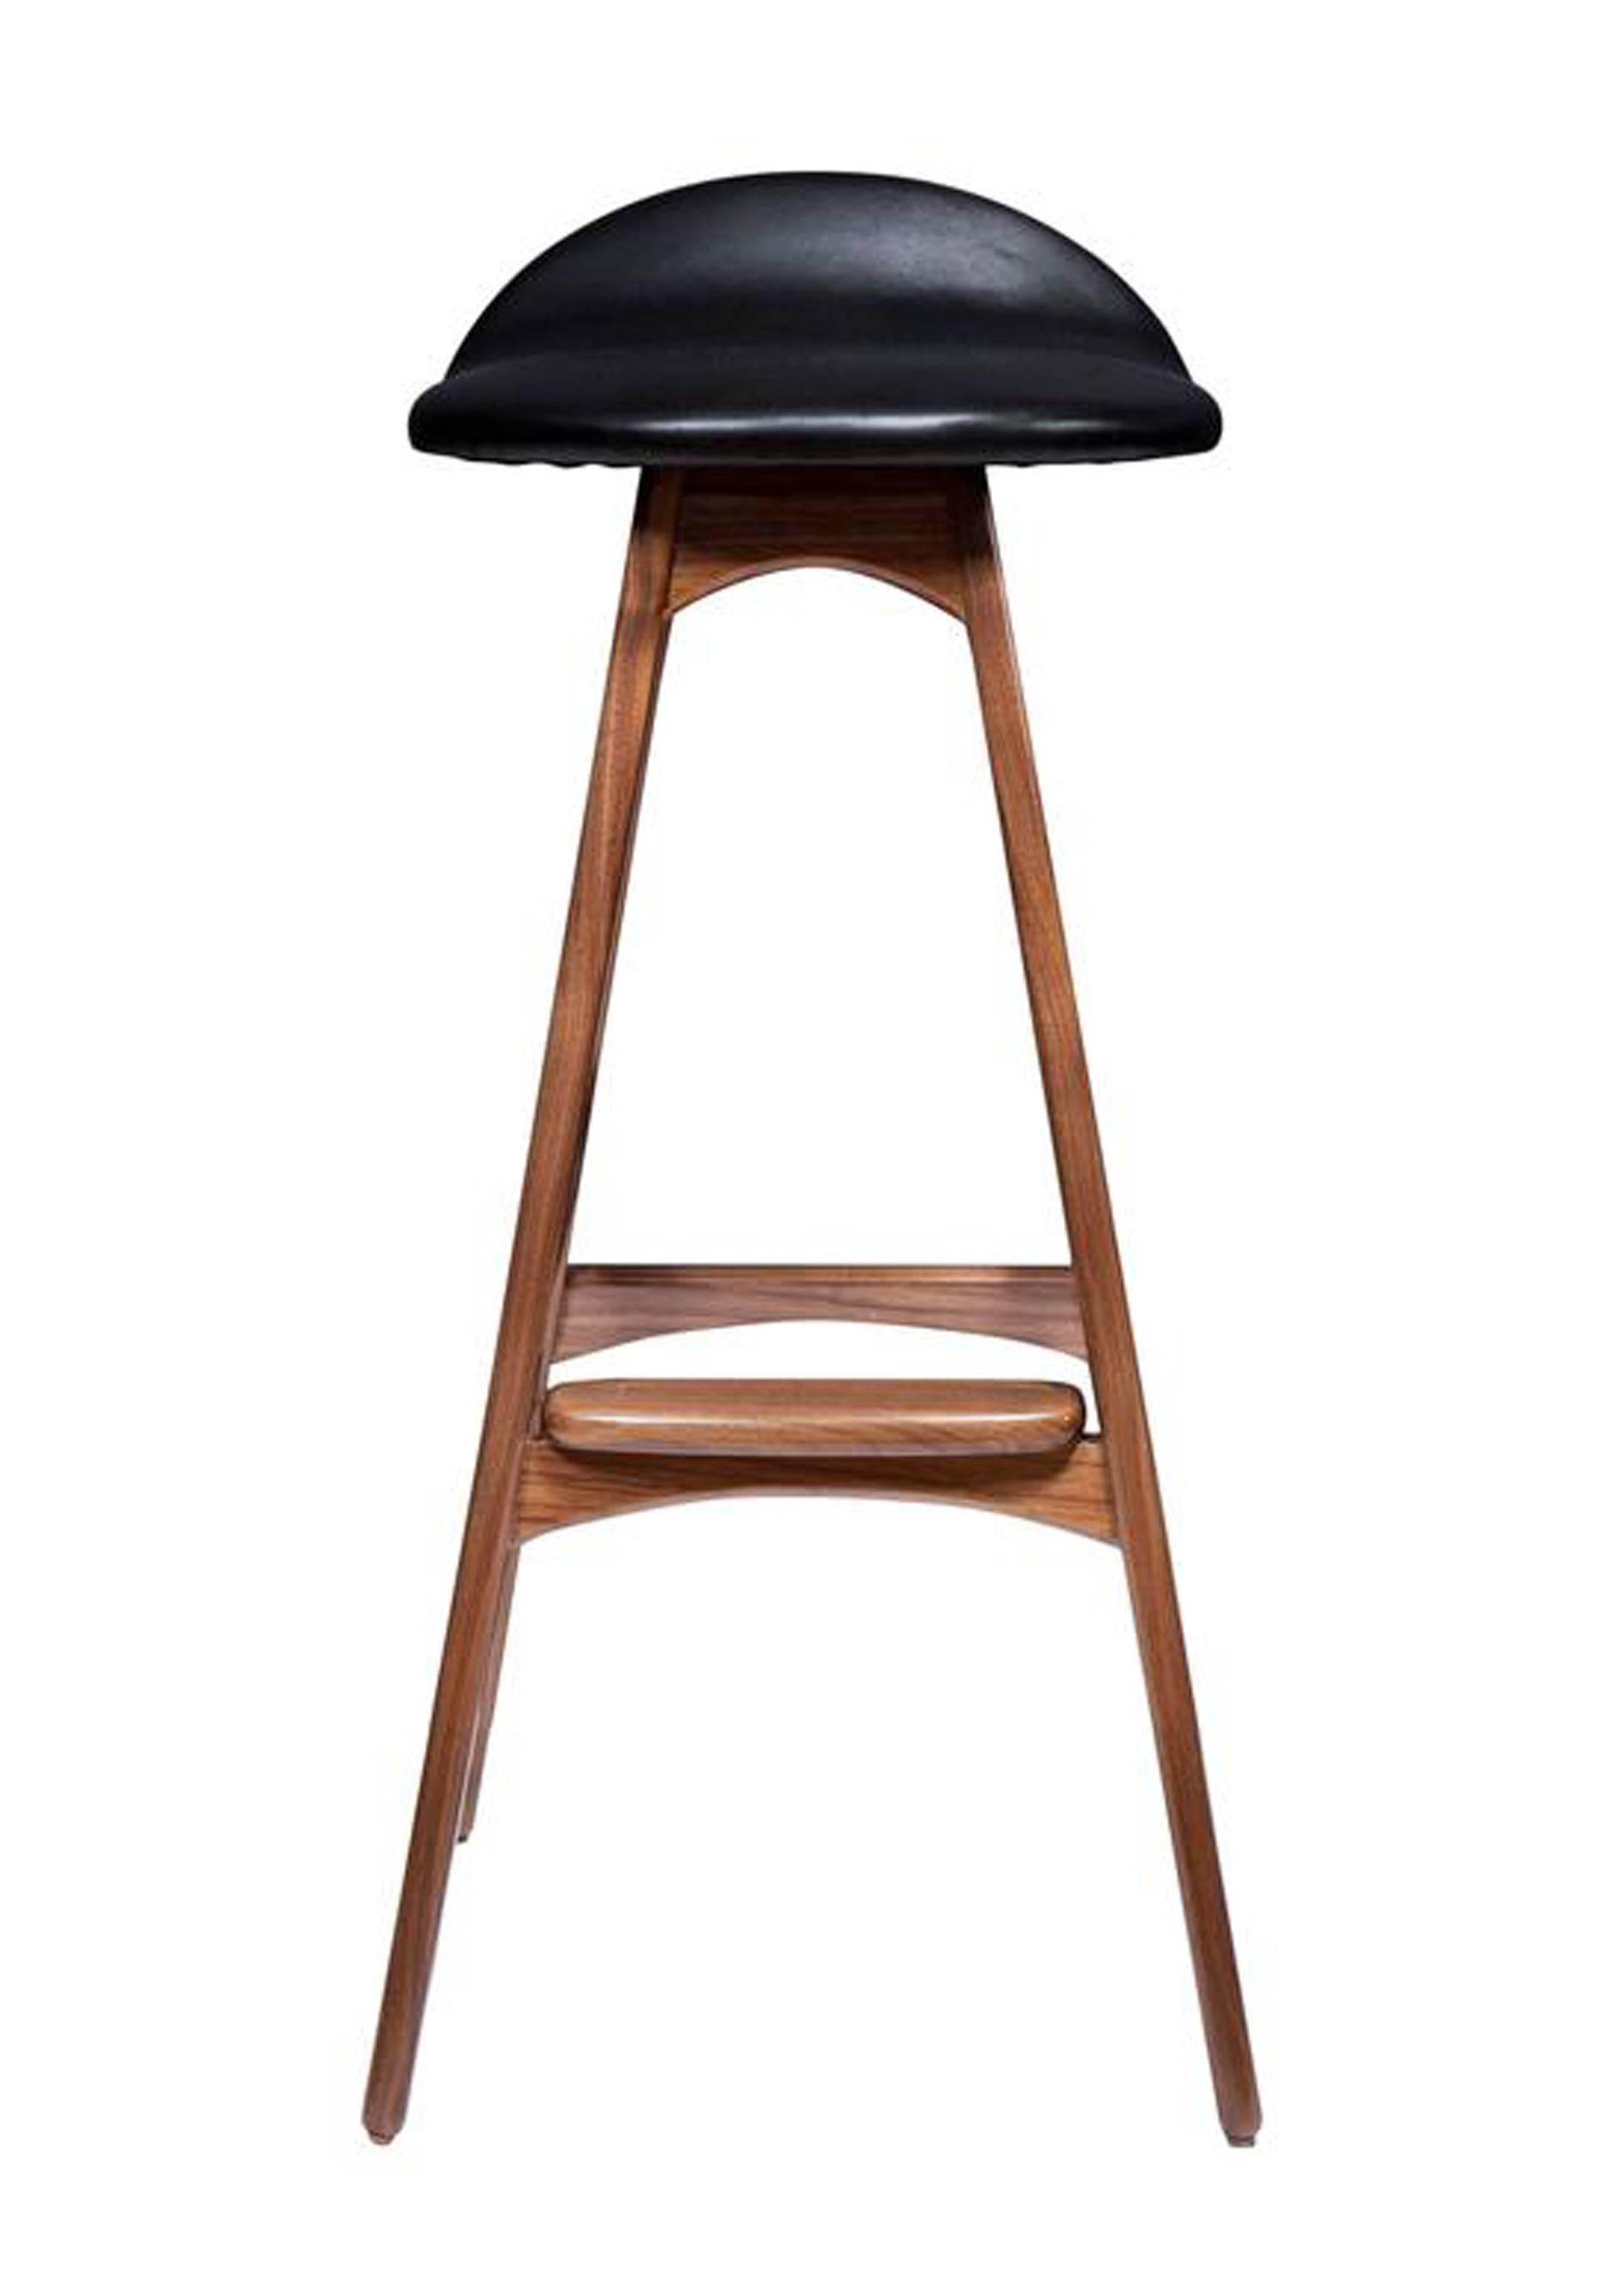 Boyd counter stool shown in solid walnut with black leather seat.
Measures: Seat height 29.75”.
Custom orders have a lead time of 10-12 weeks FOB NYC. Lead time contingent upon selection of finishes, approval of shop drawings (if applicable), and